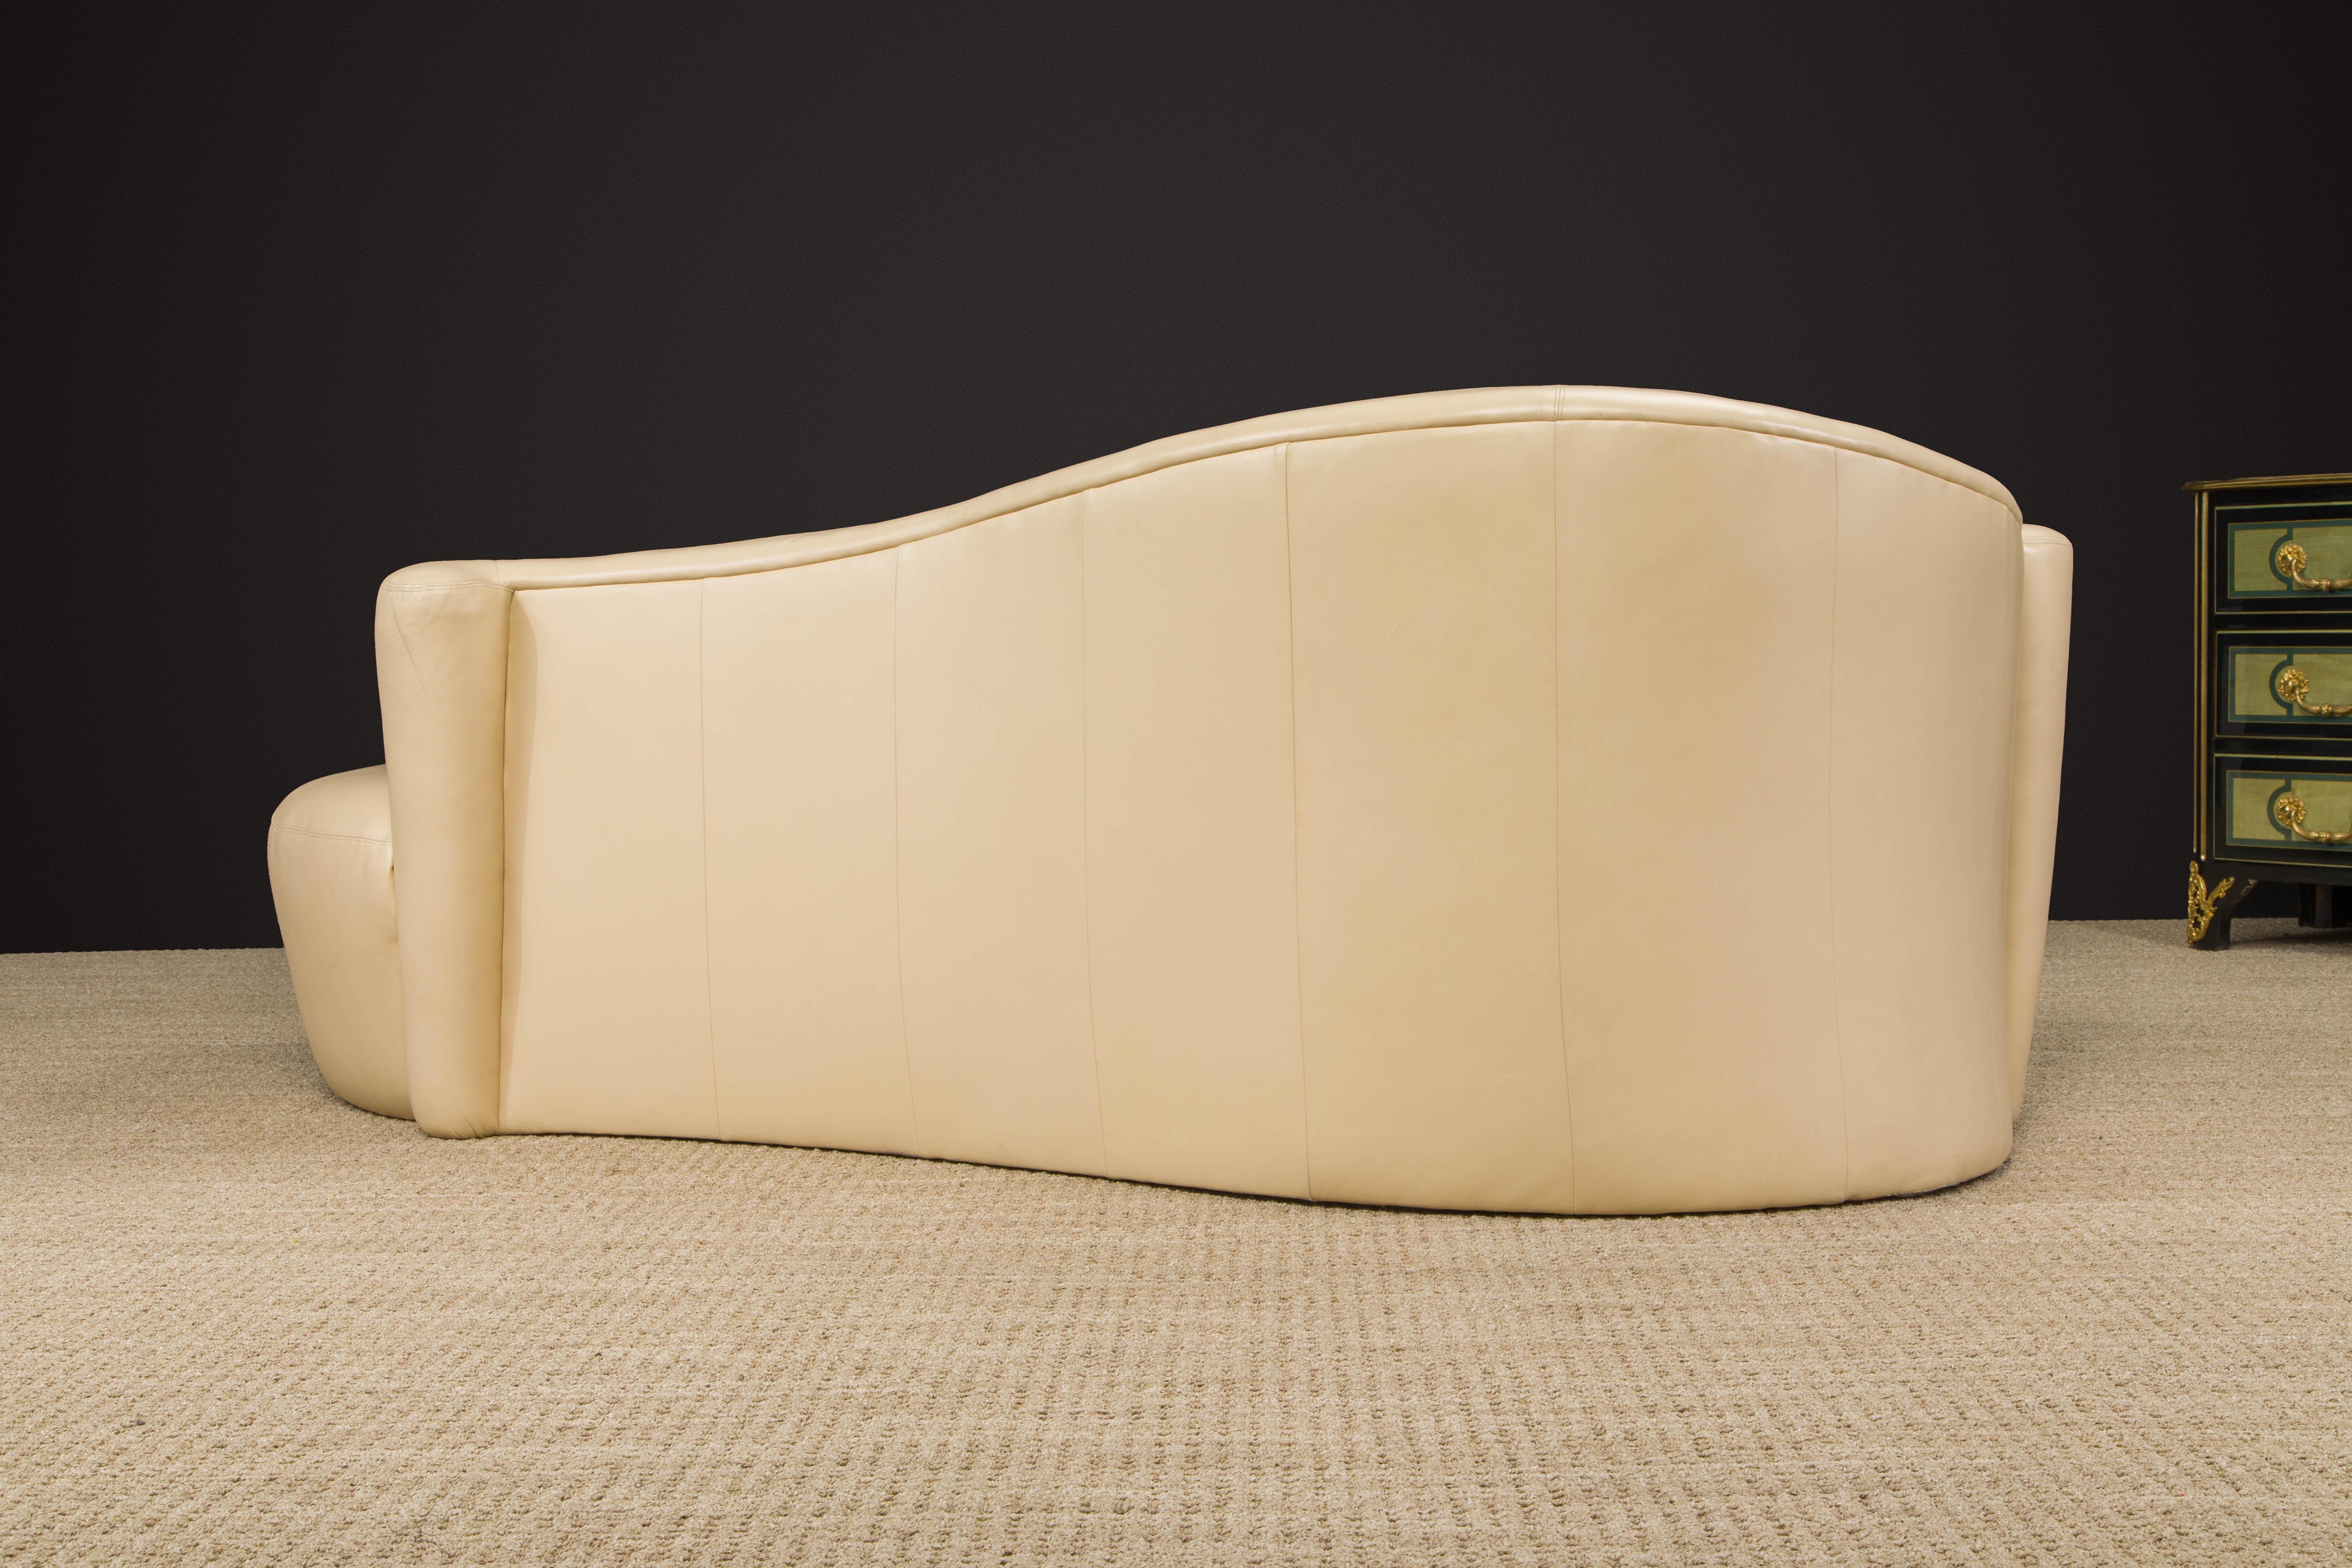 Tan Leather Cloud Style Sofa with Lucite Leg by Weiman, c 1980s, Signed For Sale 3